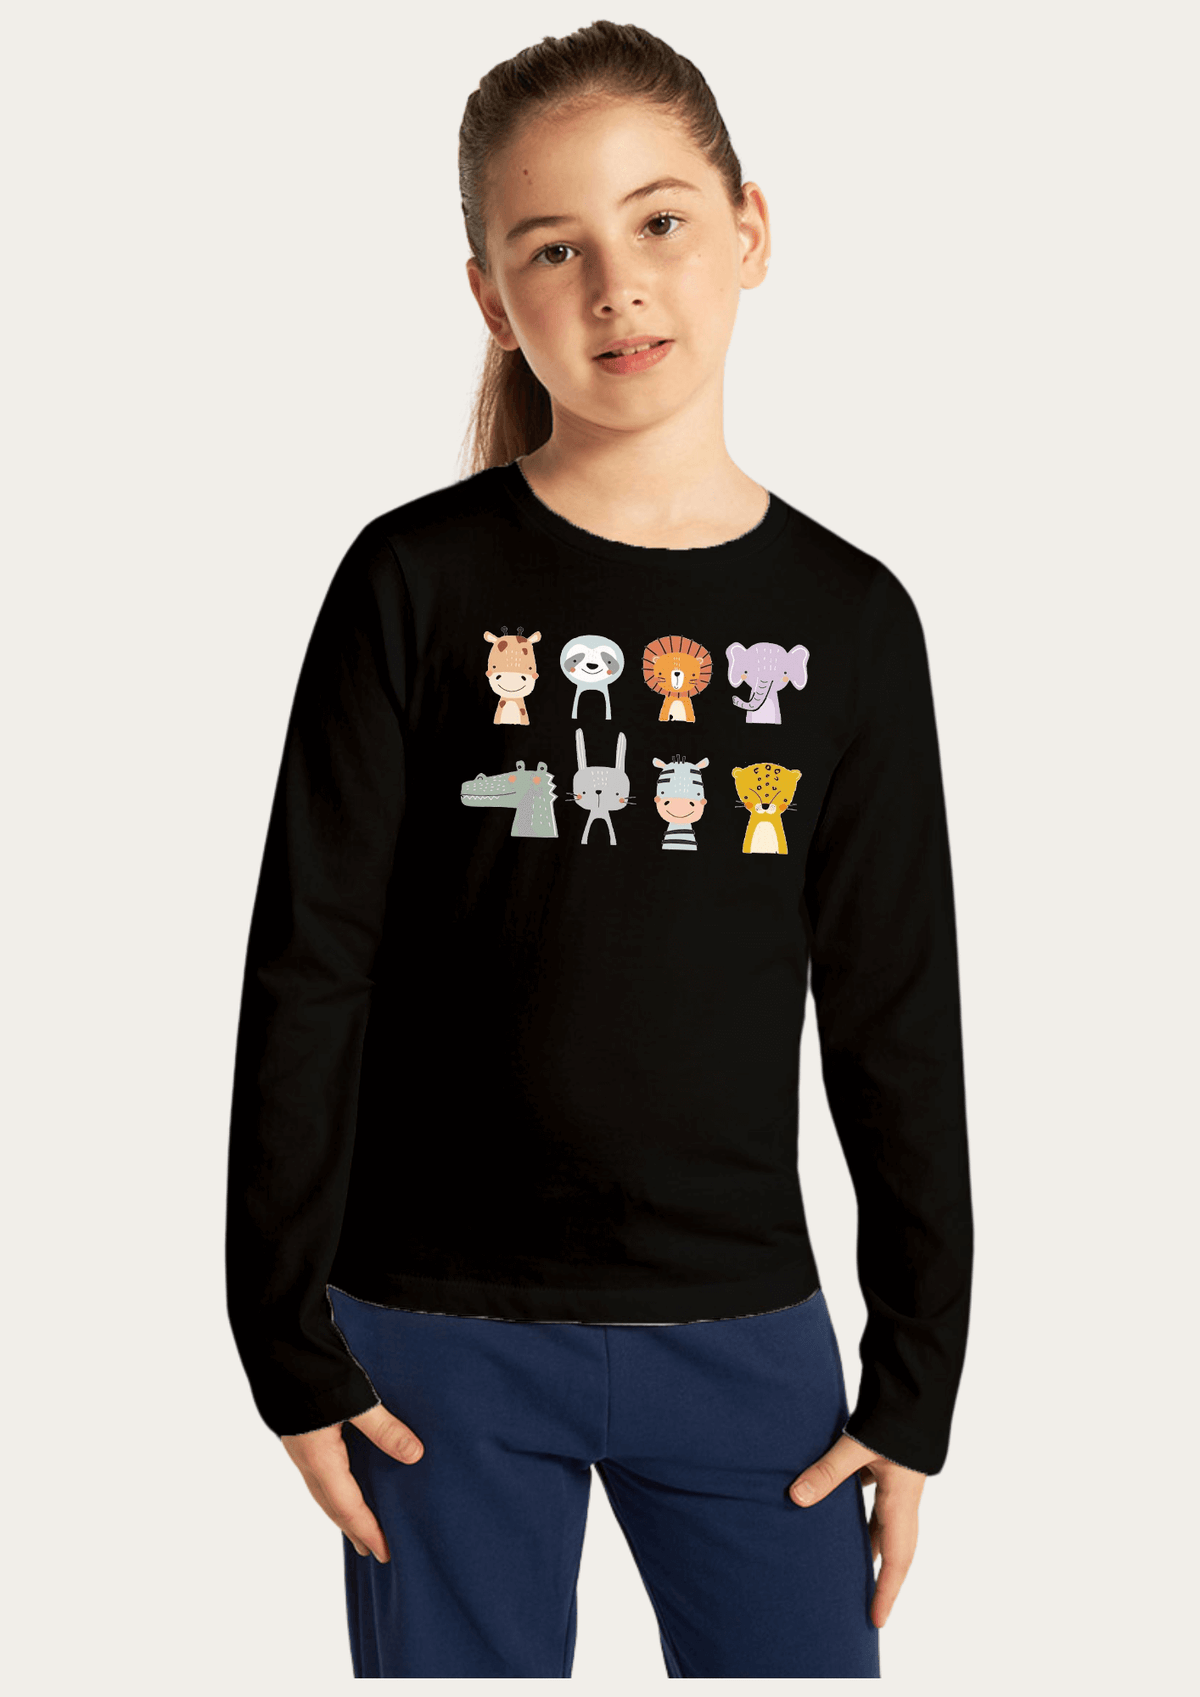 Hello Friends Printed Black Full Sleeves Kids T-shirt By Offmint